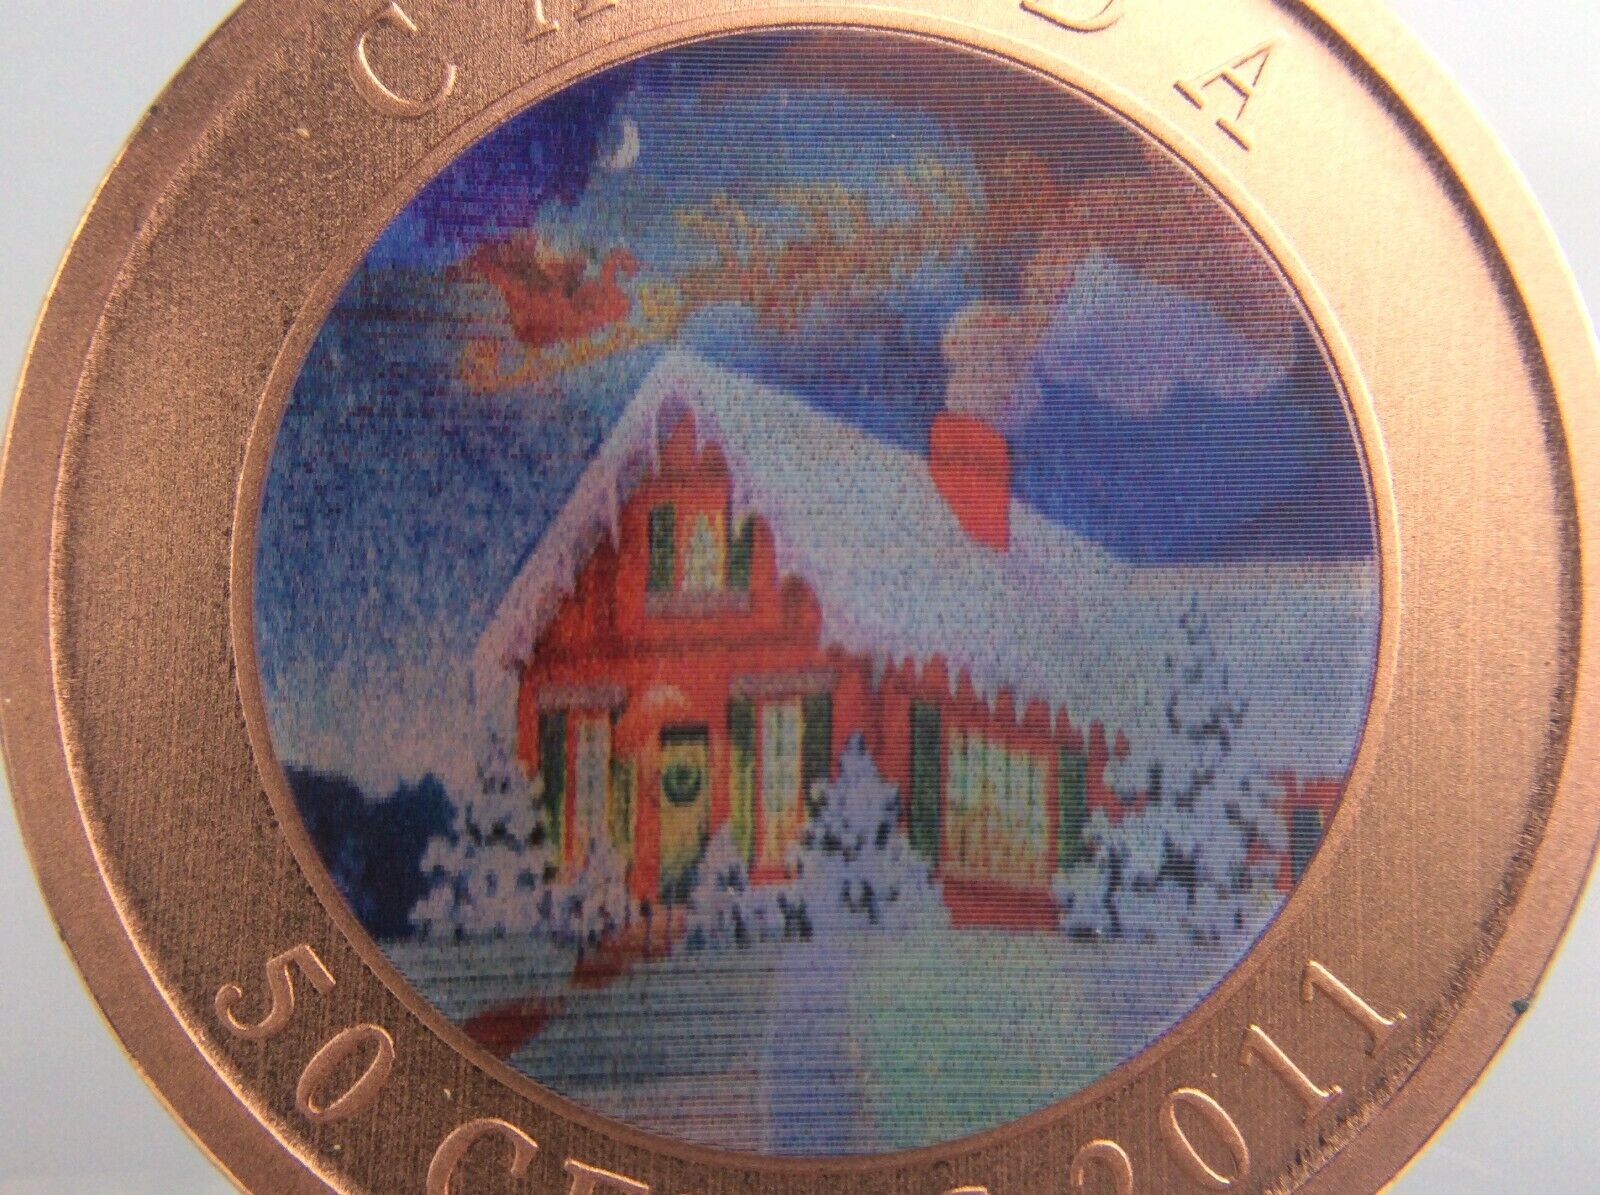 2011 Canada 50 Cents Gifts From Santa Holiday Lenticular Coin Specimen V043